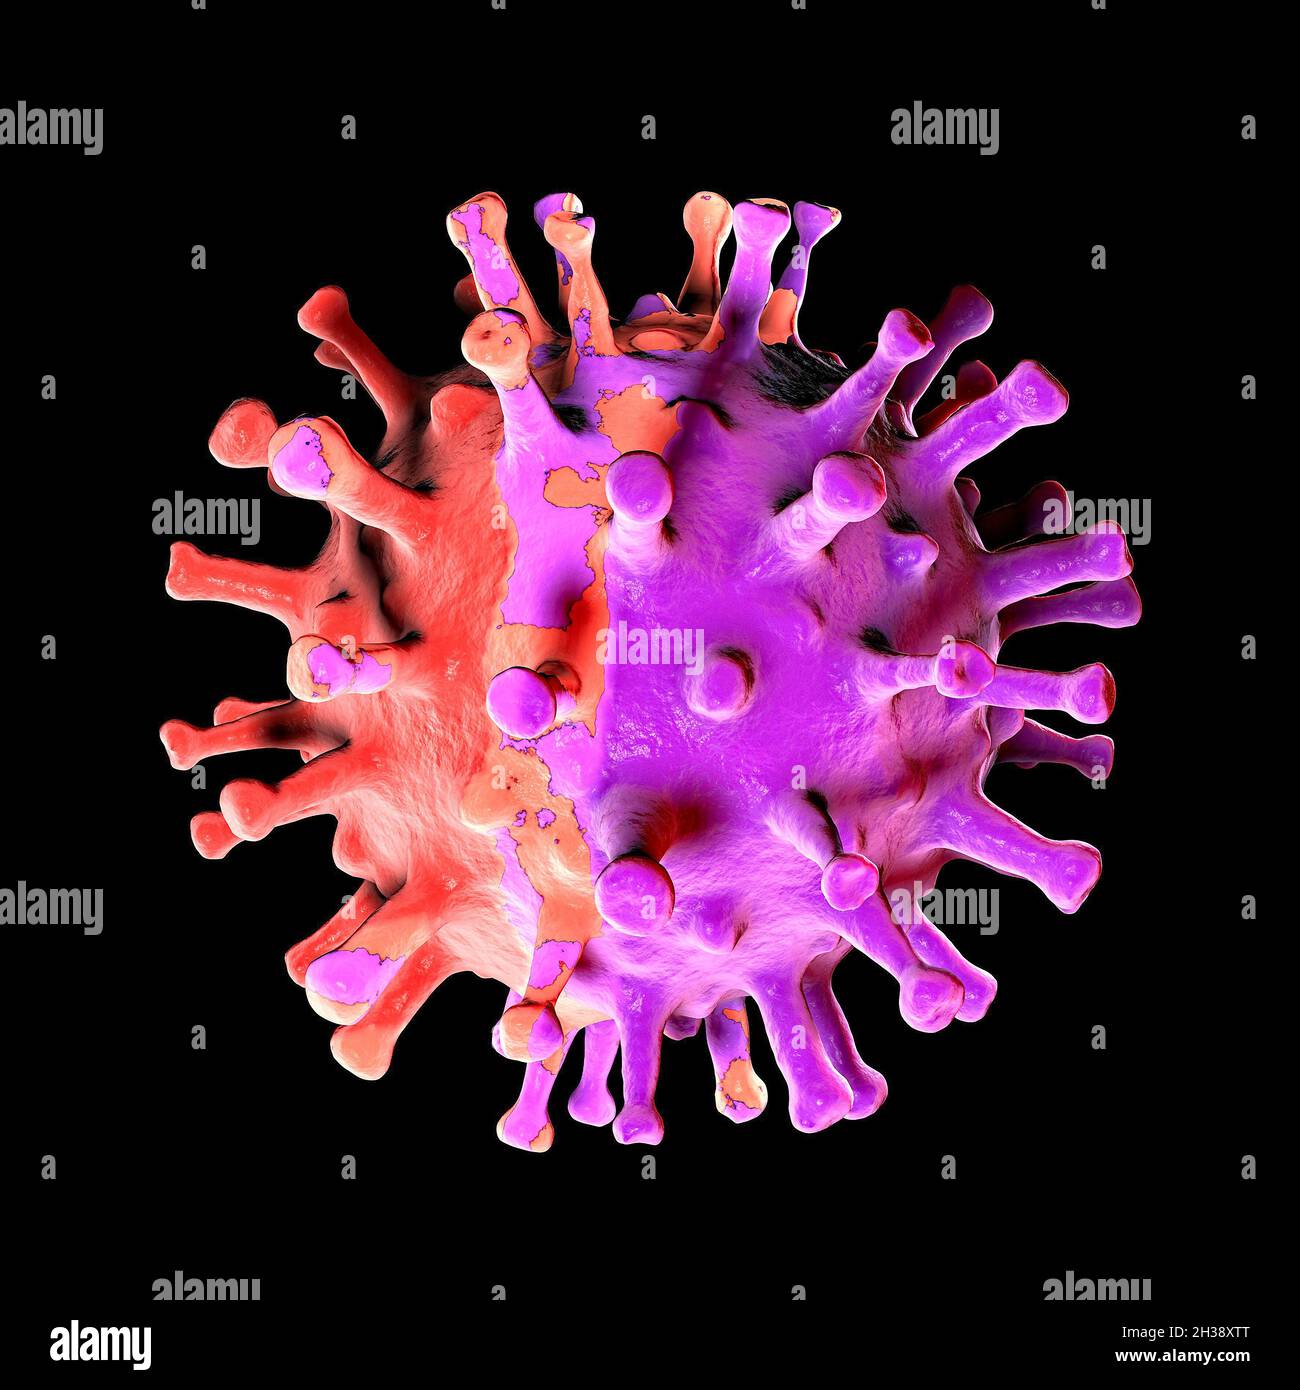 Virus, detail seen under the microscope, mutations and variants of the coronavirus, sars-cov-2. Magnification. White background space. Covid-19 Stock Photo